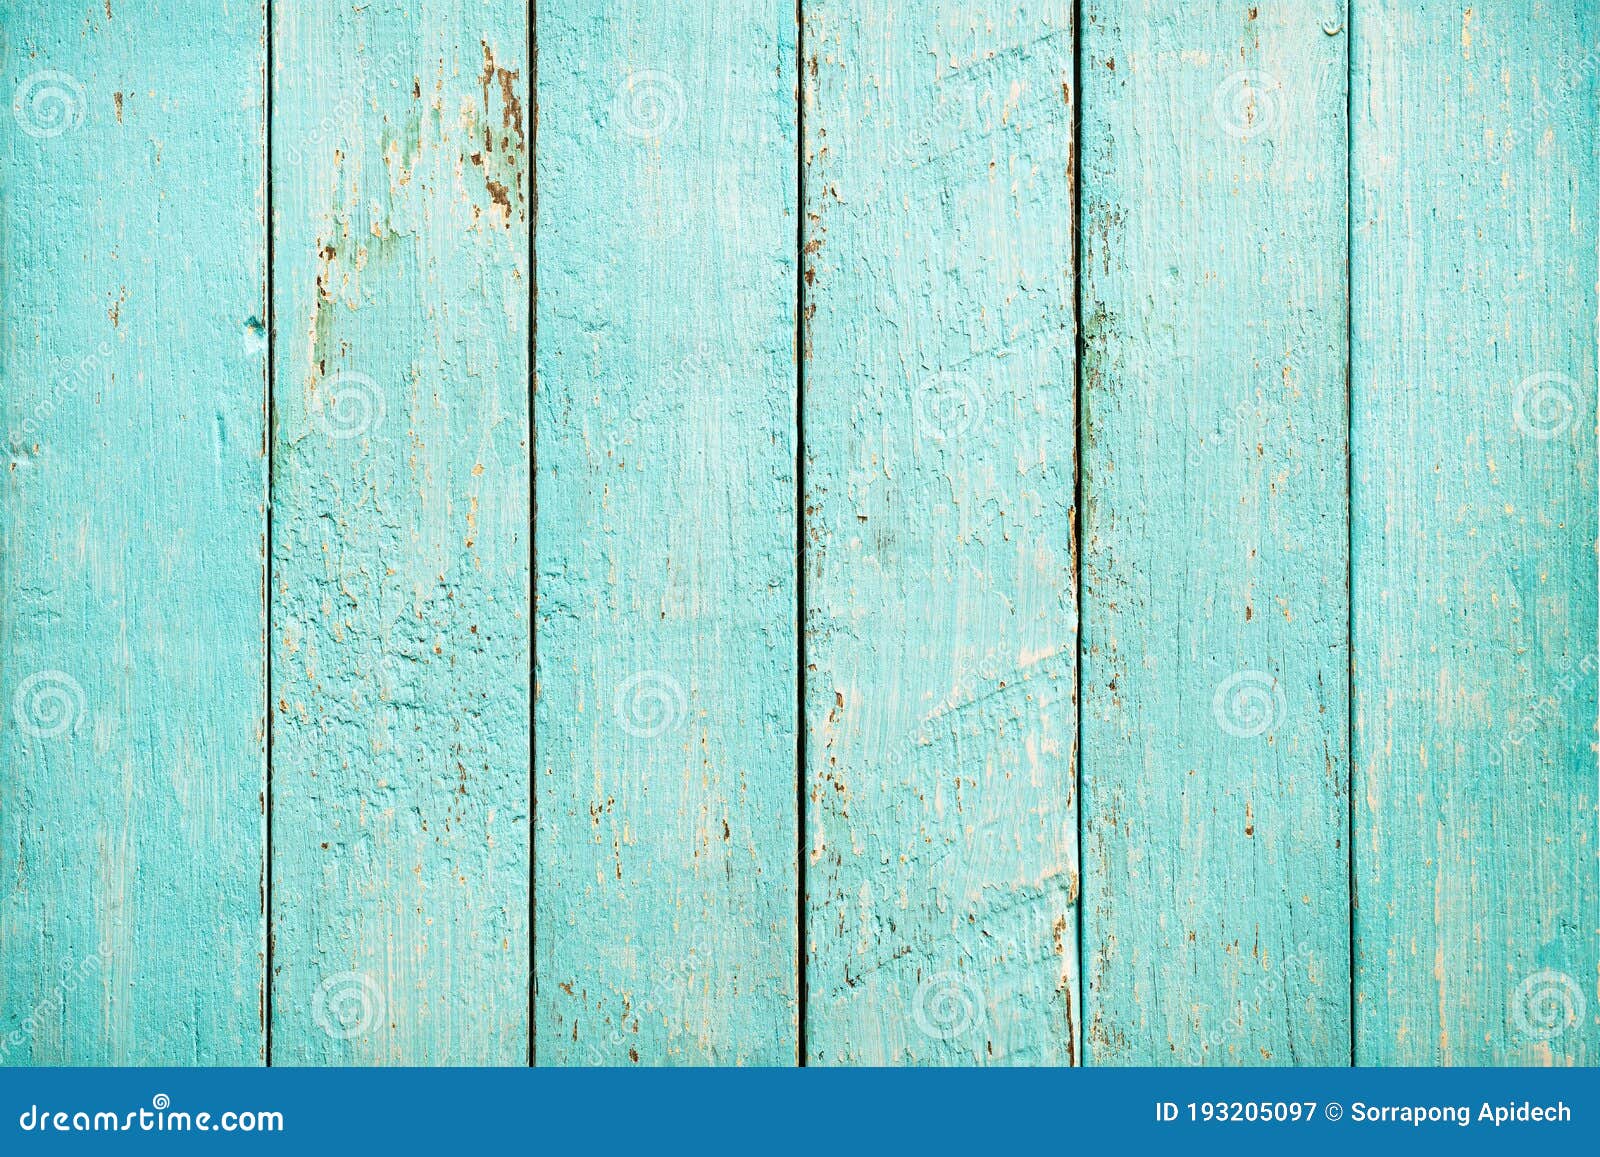 Blue Wooden Panel For Background The Surface Blue Wood Texture For Design Top View Wood Paneling Stock Image Image Of Grunge Pine